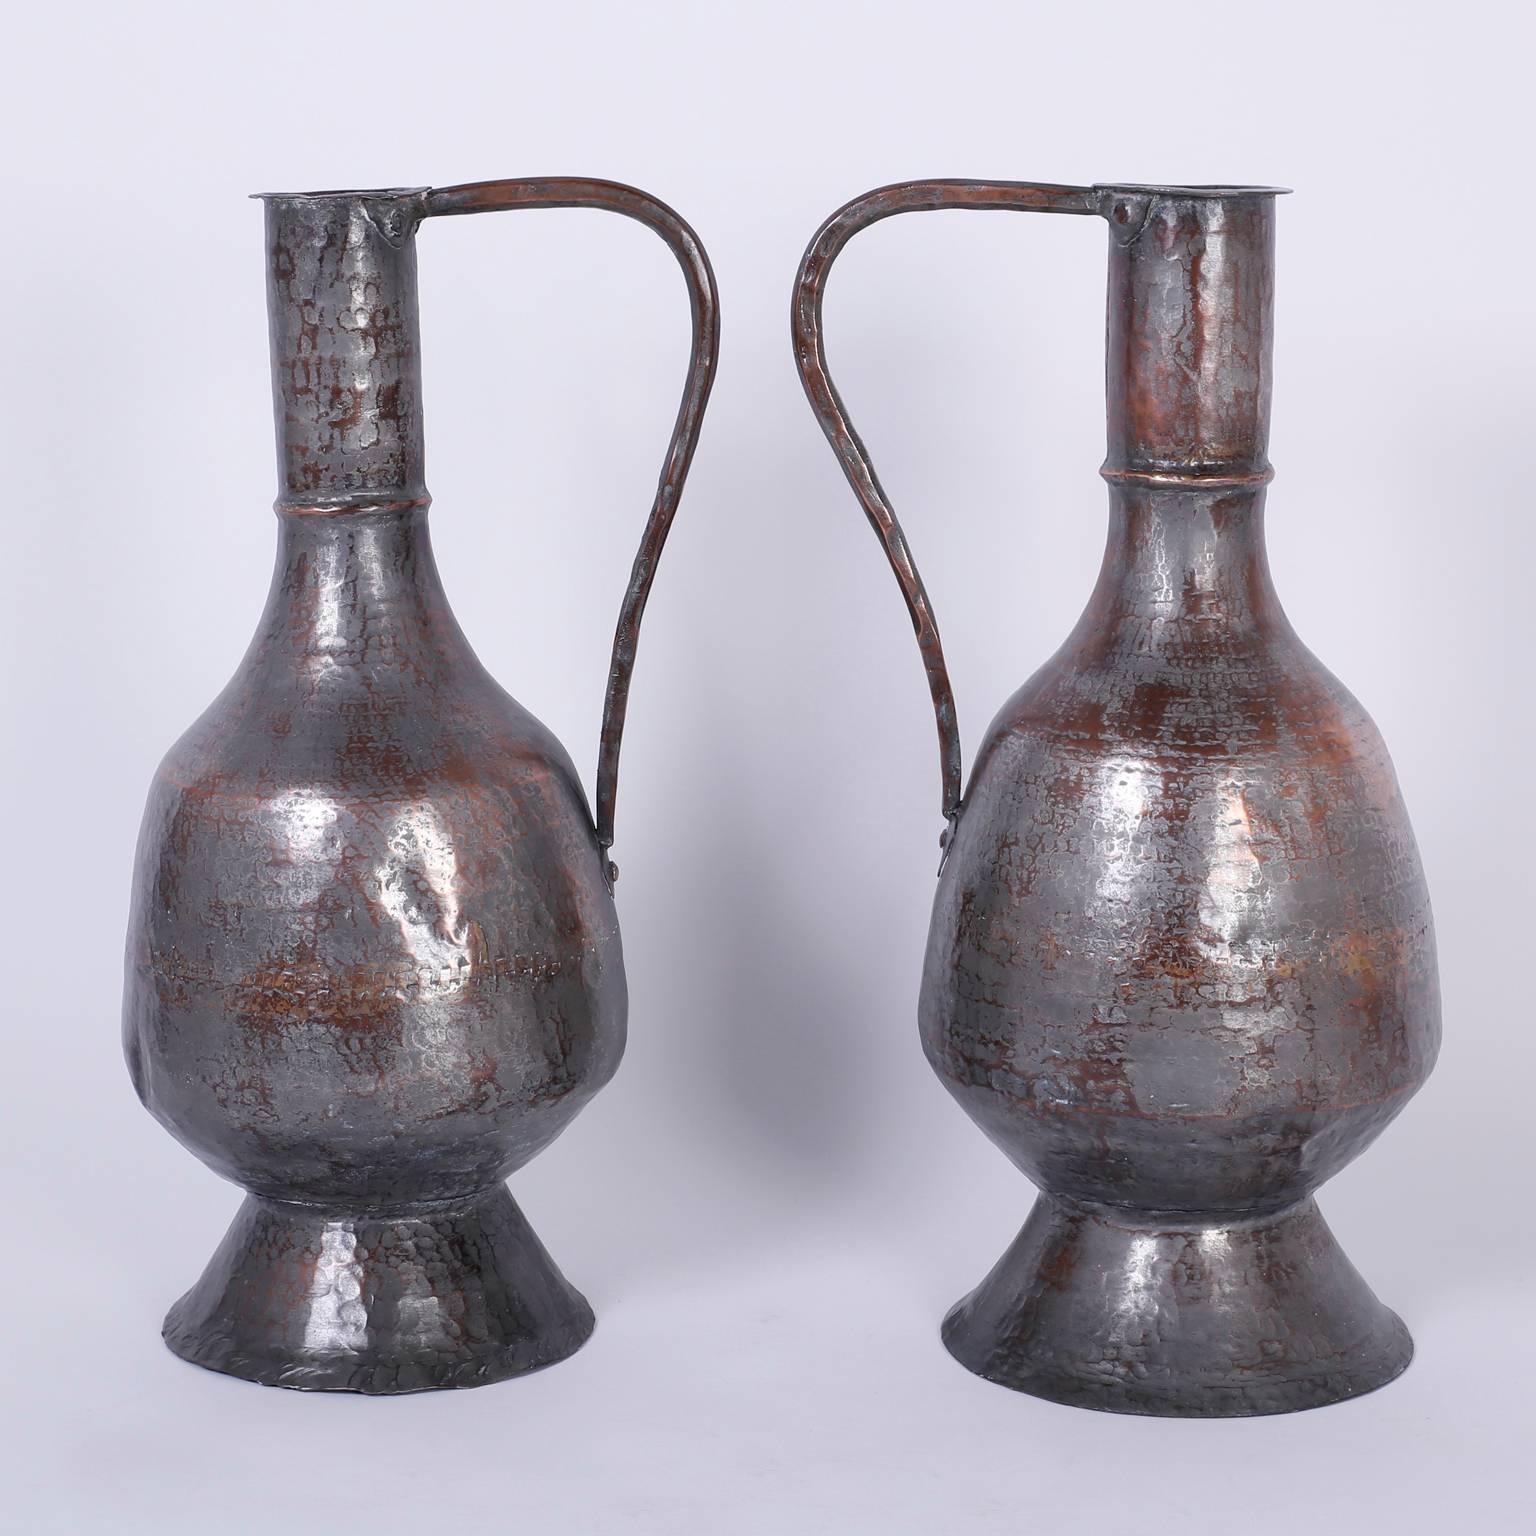 Antique pair of water pitchers or jugs handcrafted with copper, hammered, riveted, and plated with a translucent silver finish, giving them an acquired rustic quality only time and use can convey.